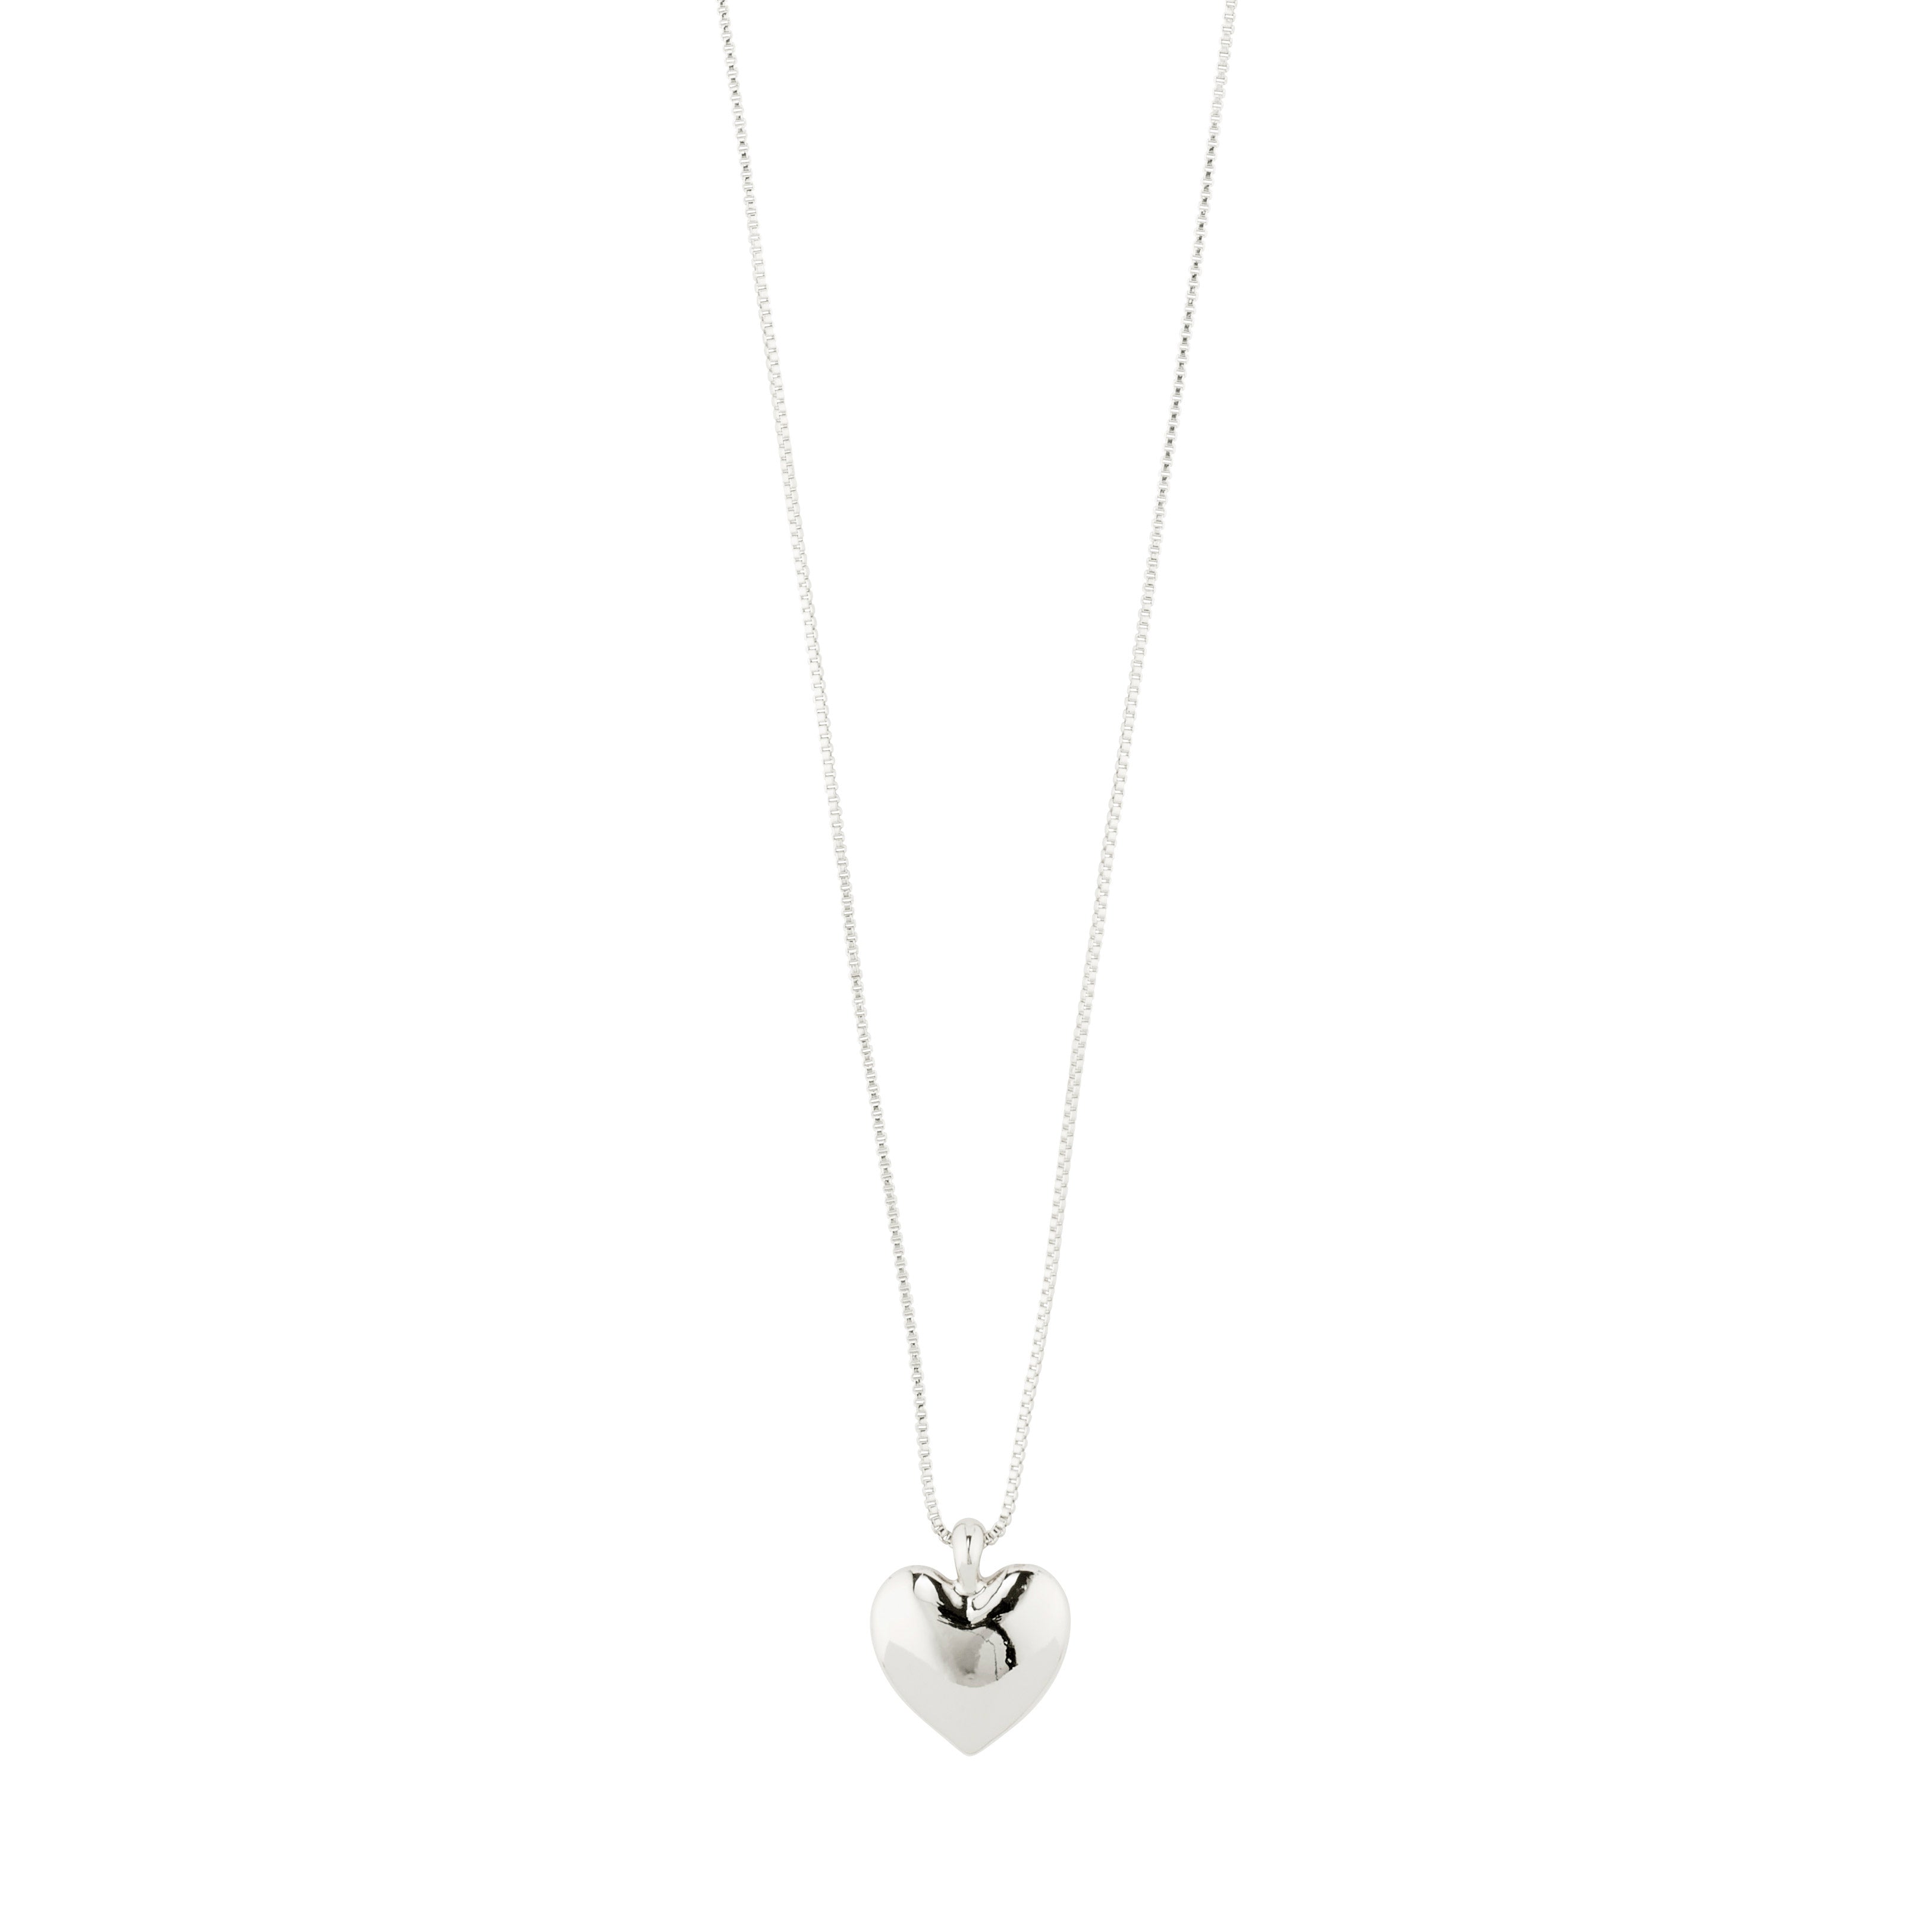 SOPHIA recycled heart necklace silver-plated